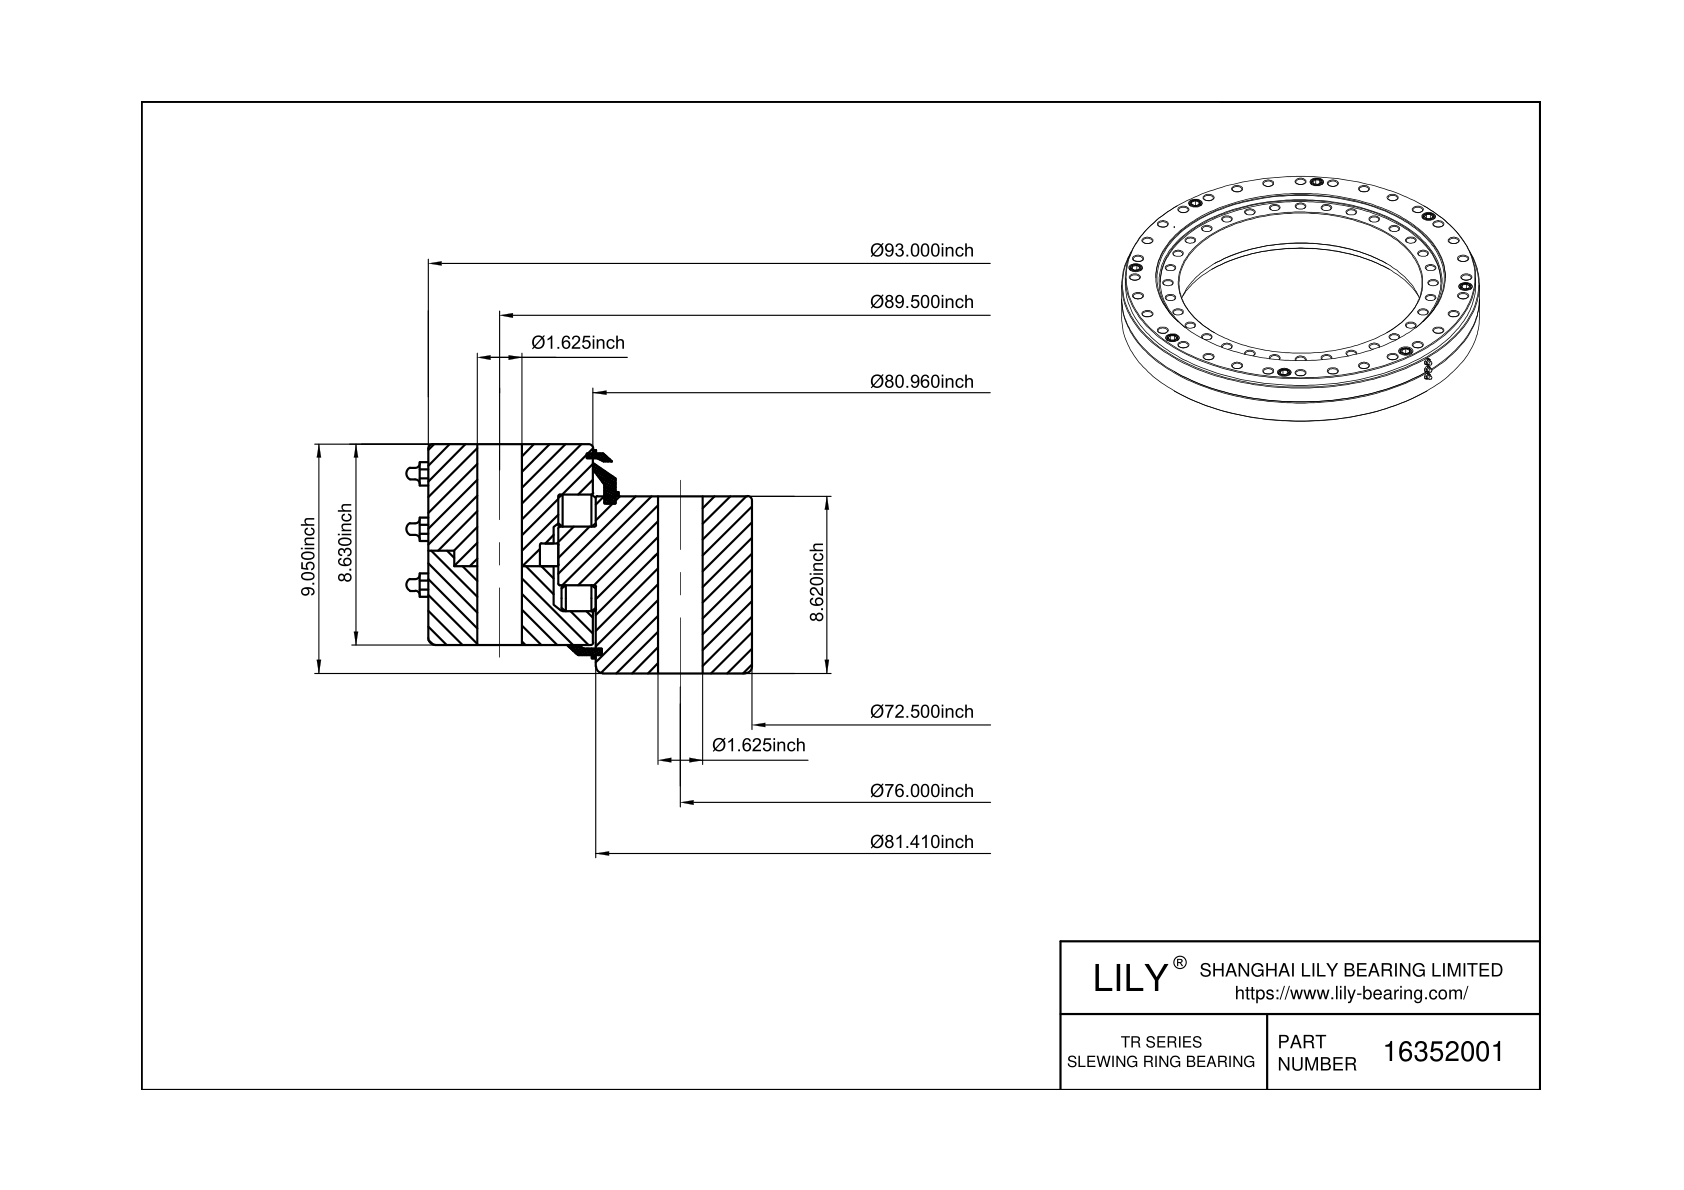 16352001 TR Series cad drawing